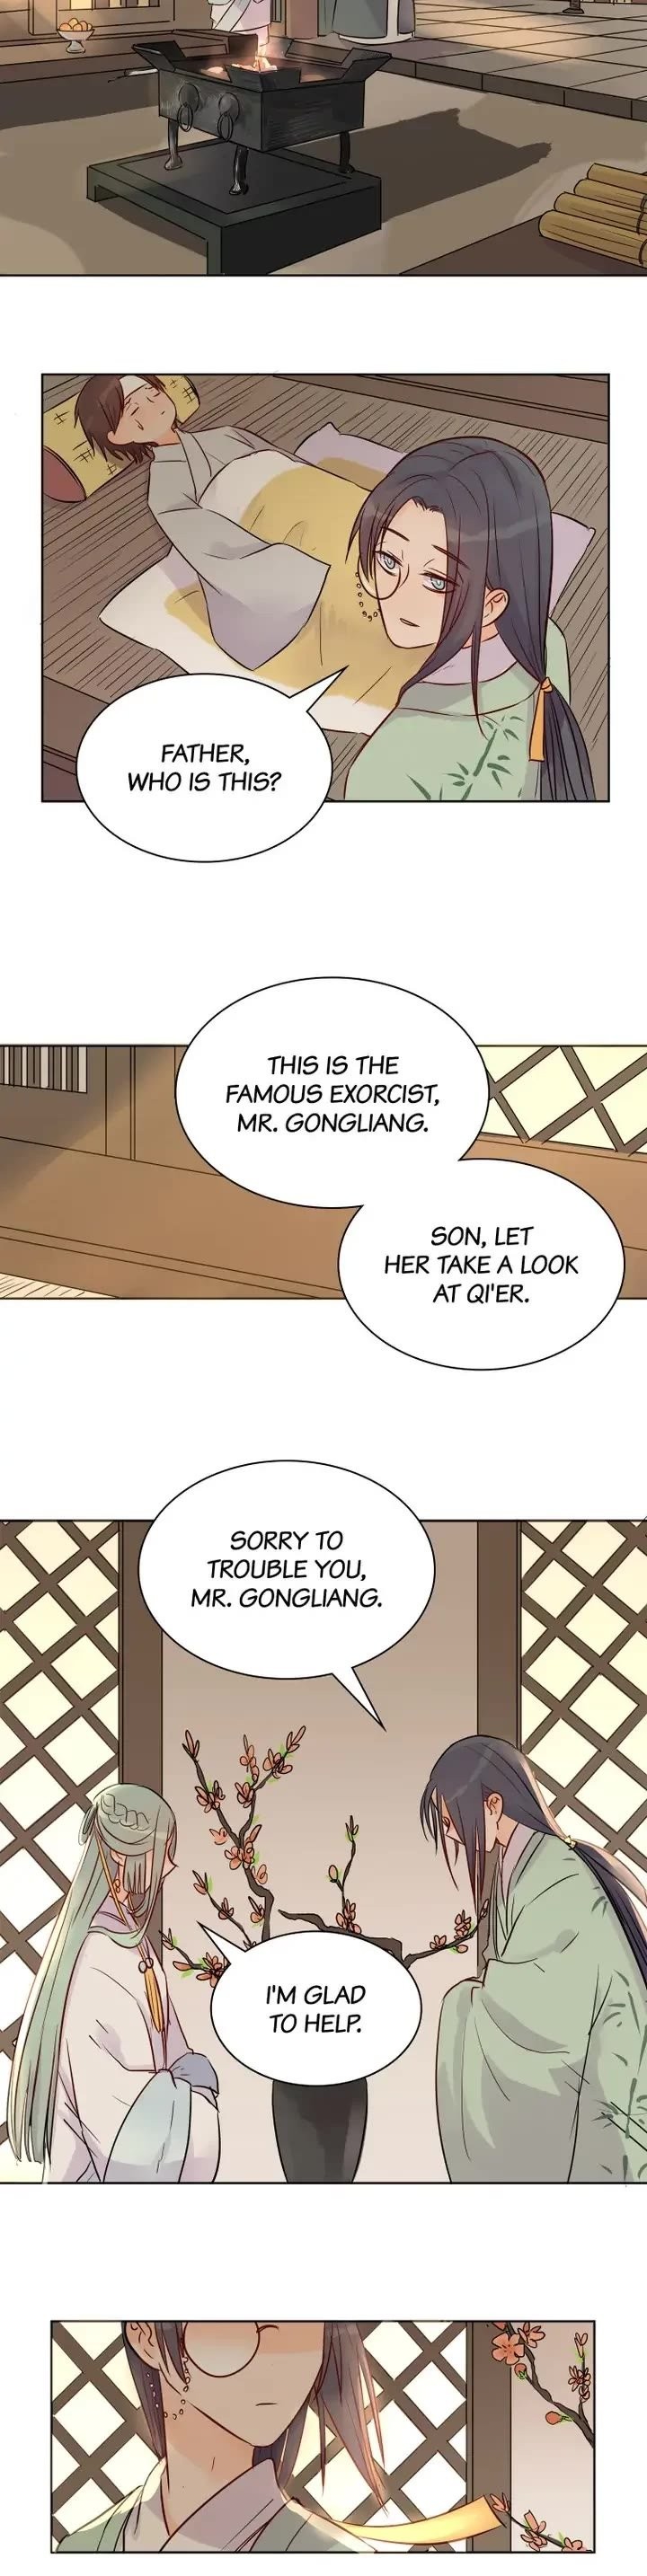 A Gust Of Wind Blows At Daybreak Chapter 18 Page 5